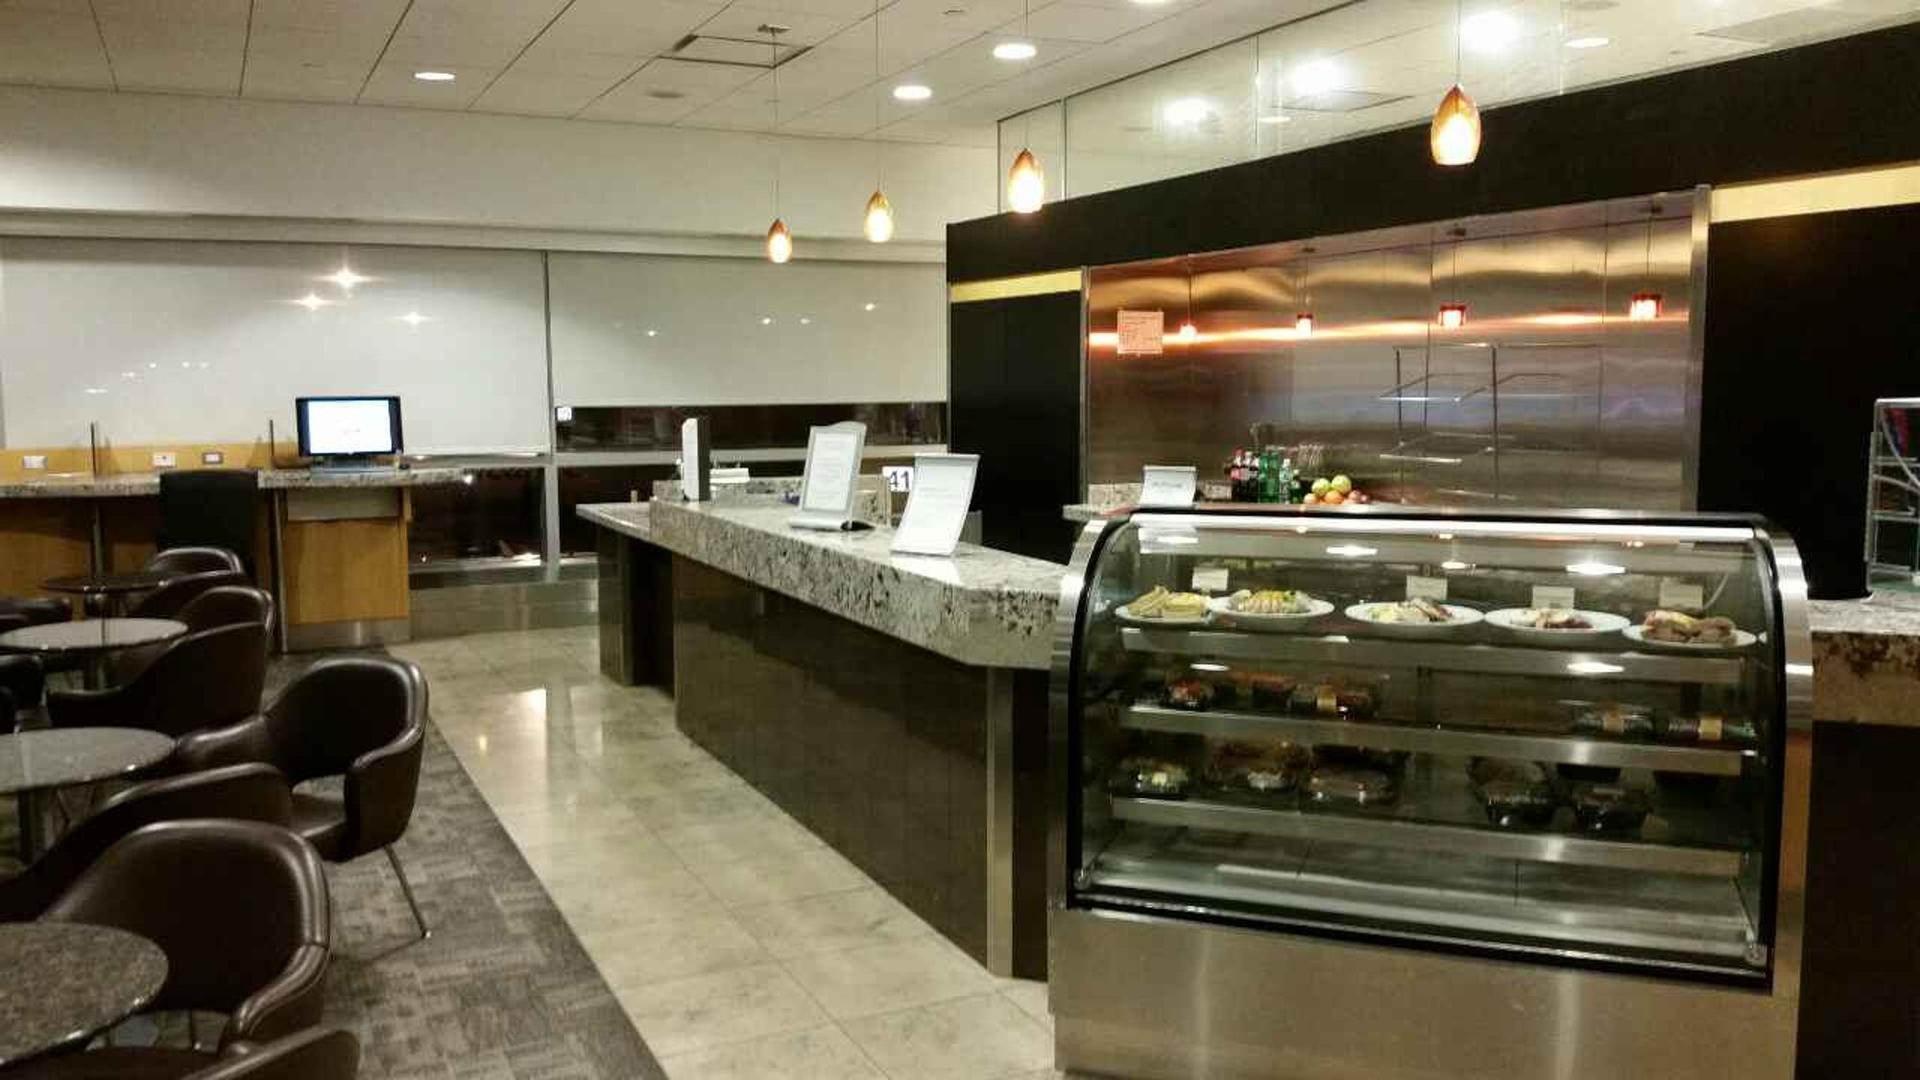 American Airlines Admirals Club image 19 of 25